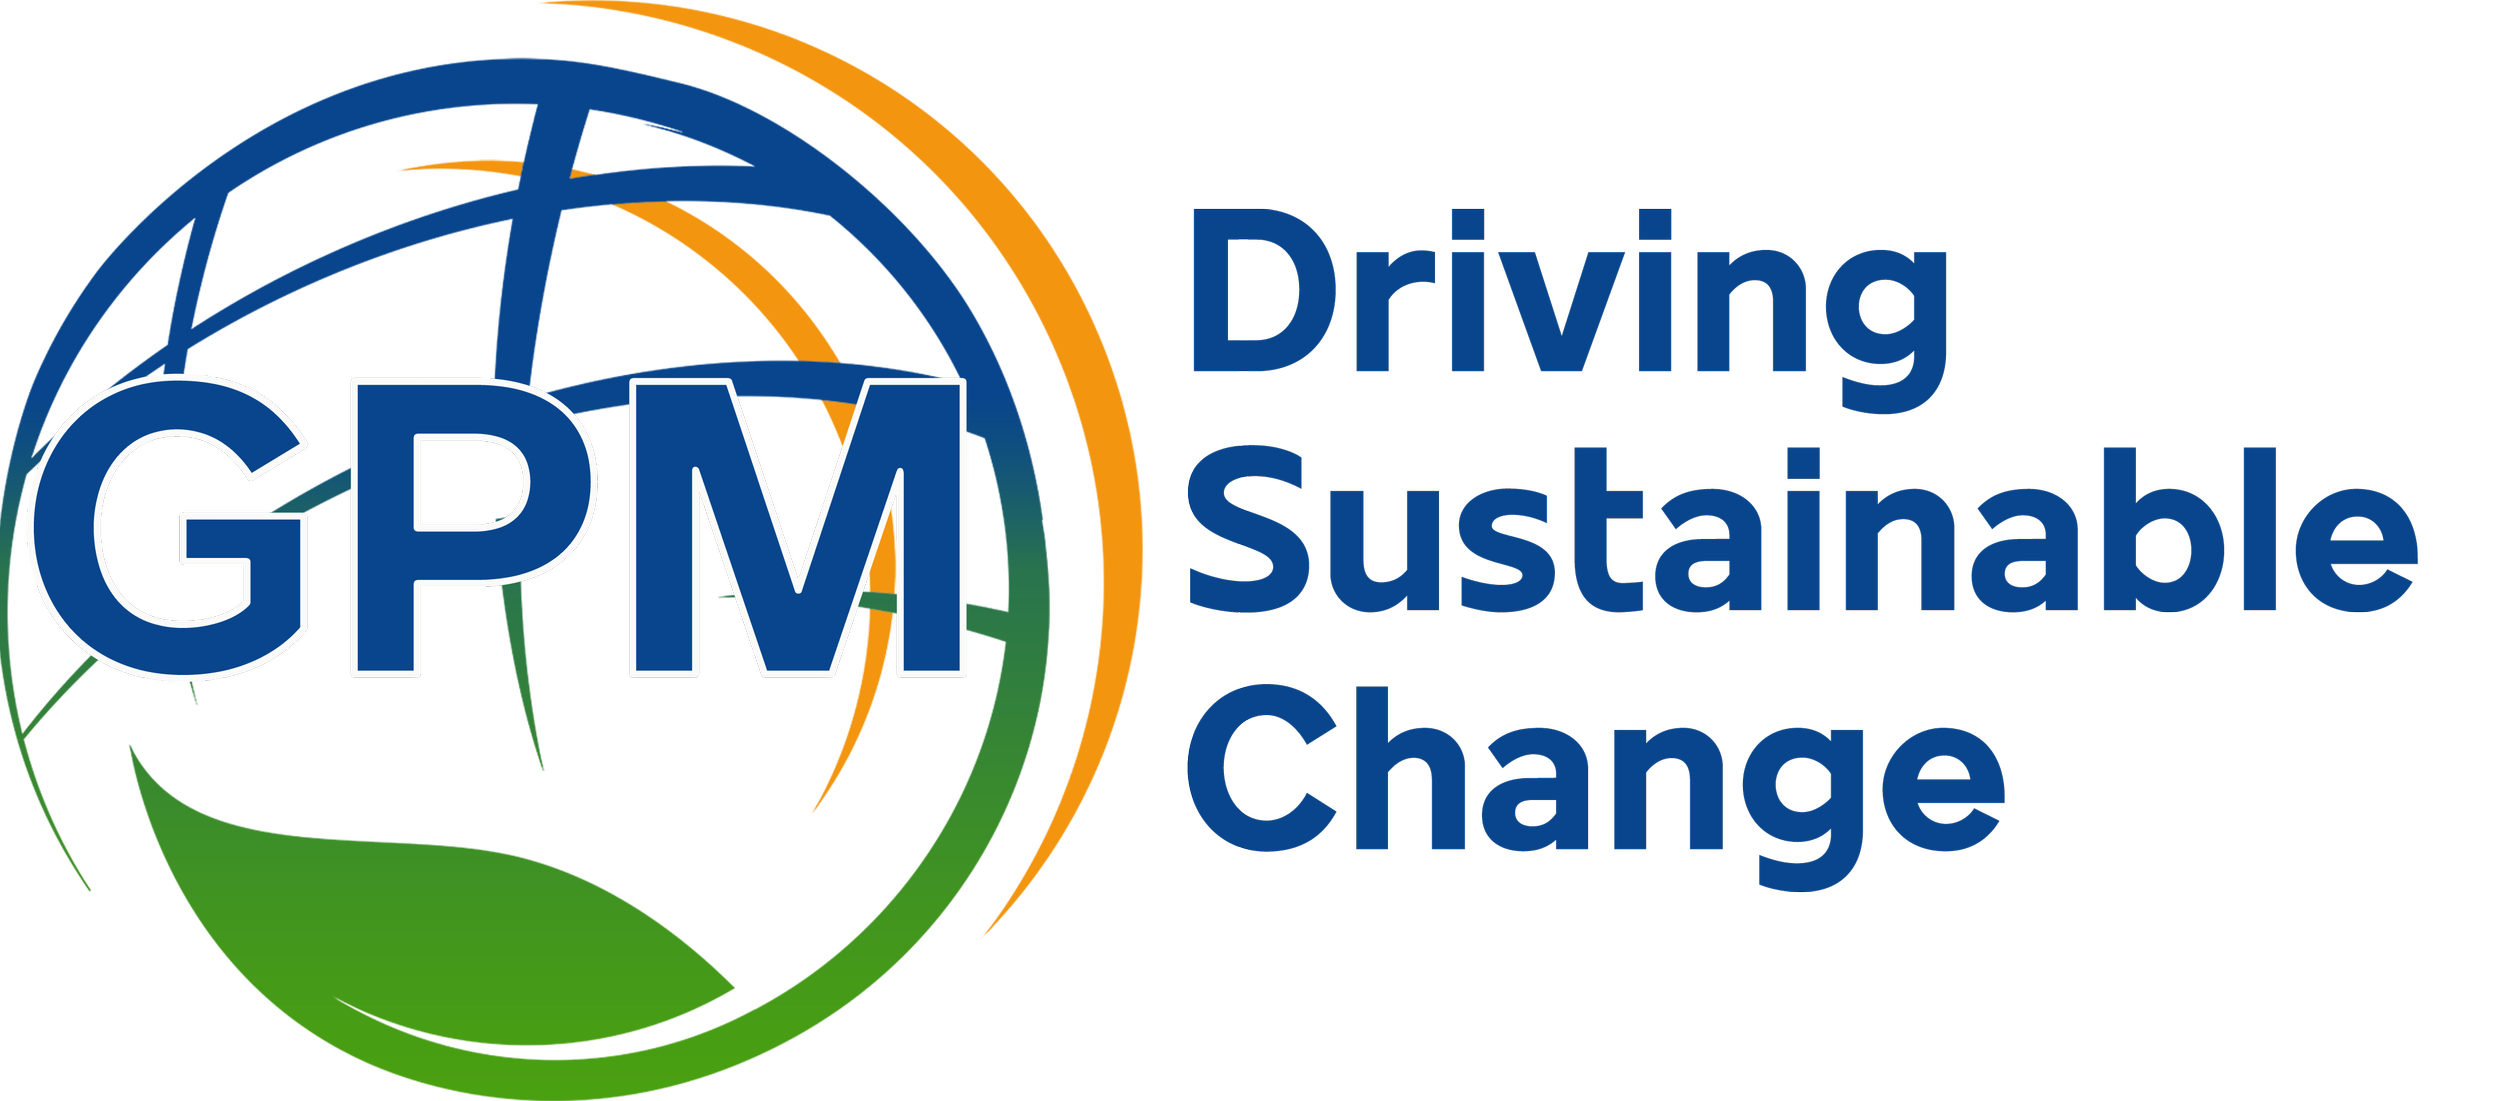 GPM Driving Sustainable Change Logo.png